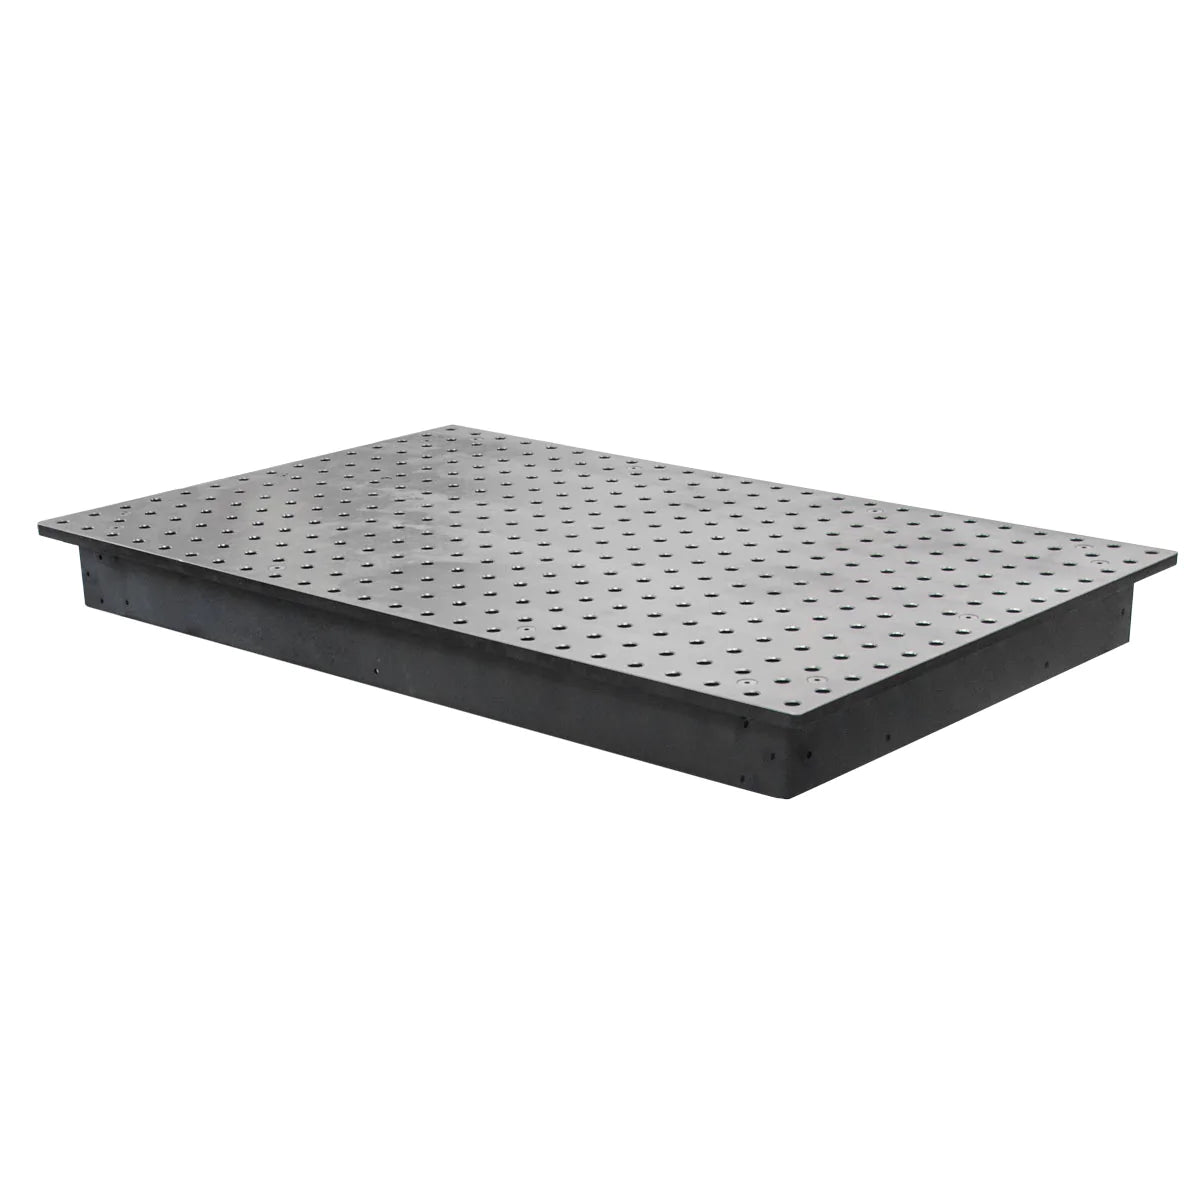 Pitking Products Aluminium Hand Tool Tray - 400mm x 170mm - Race/Rally/Track